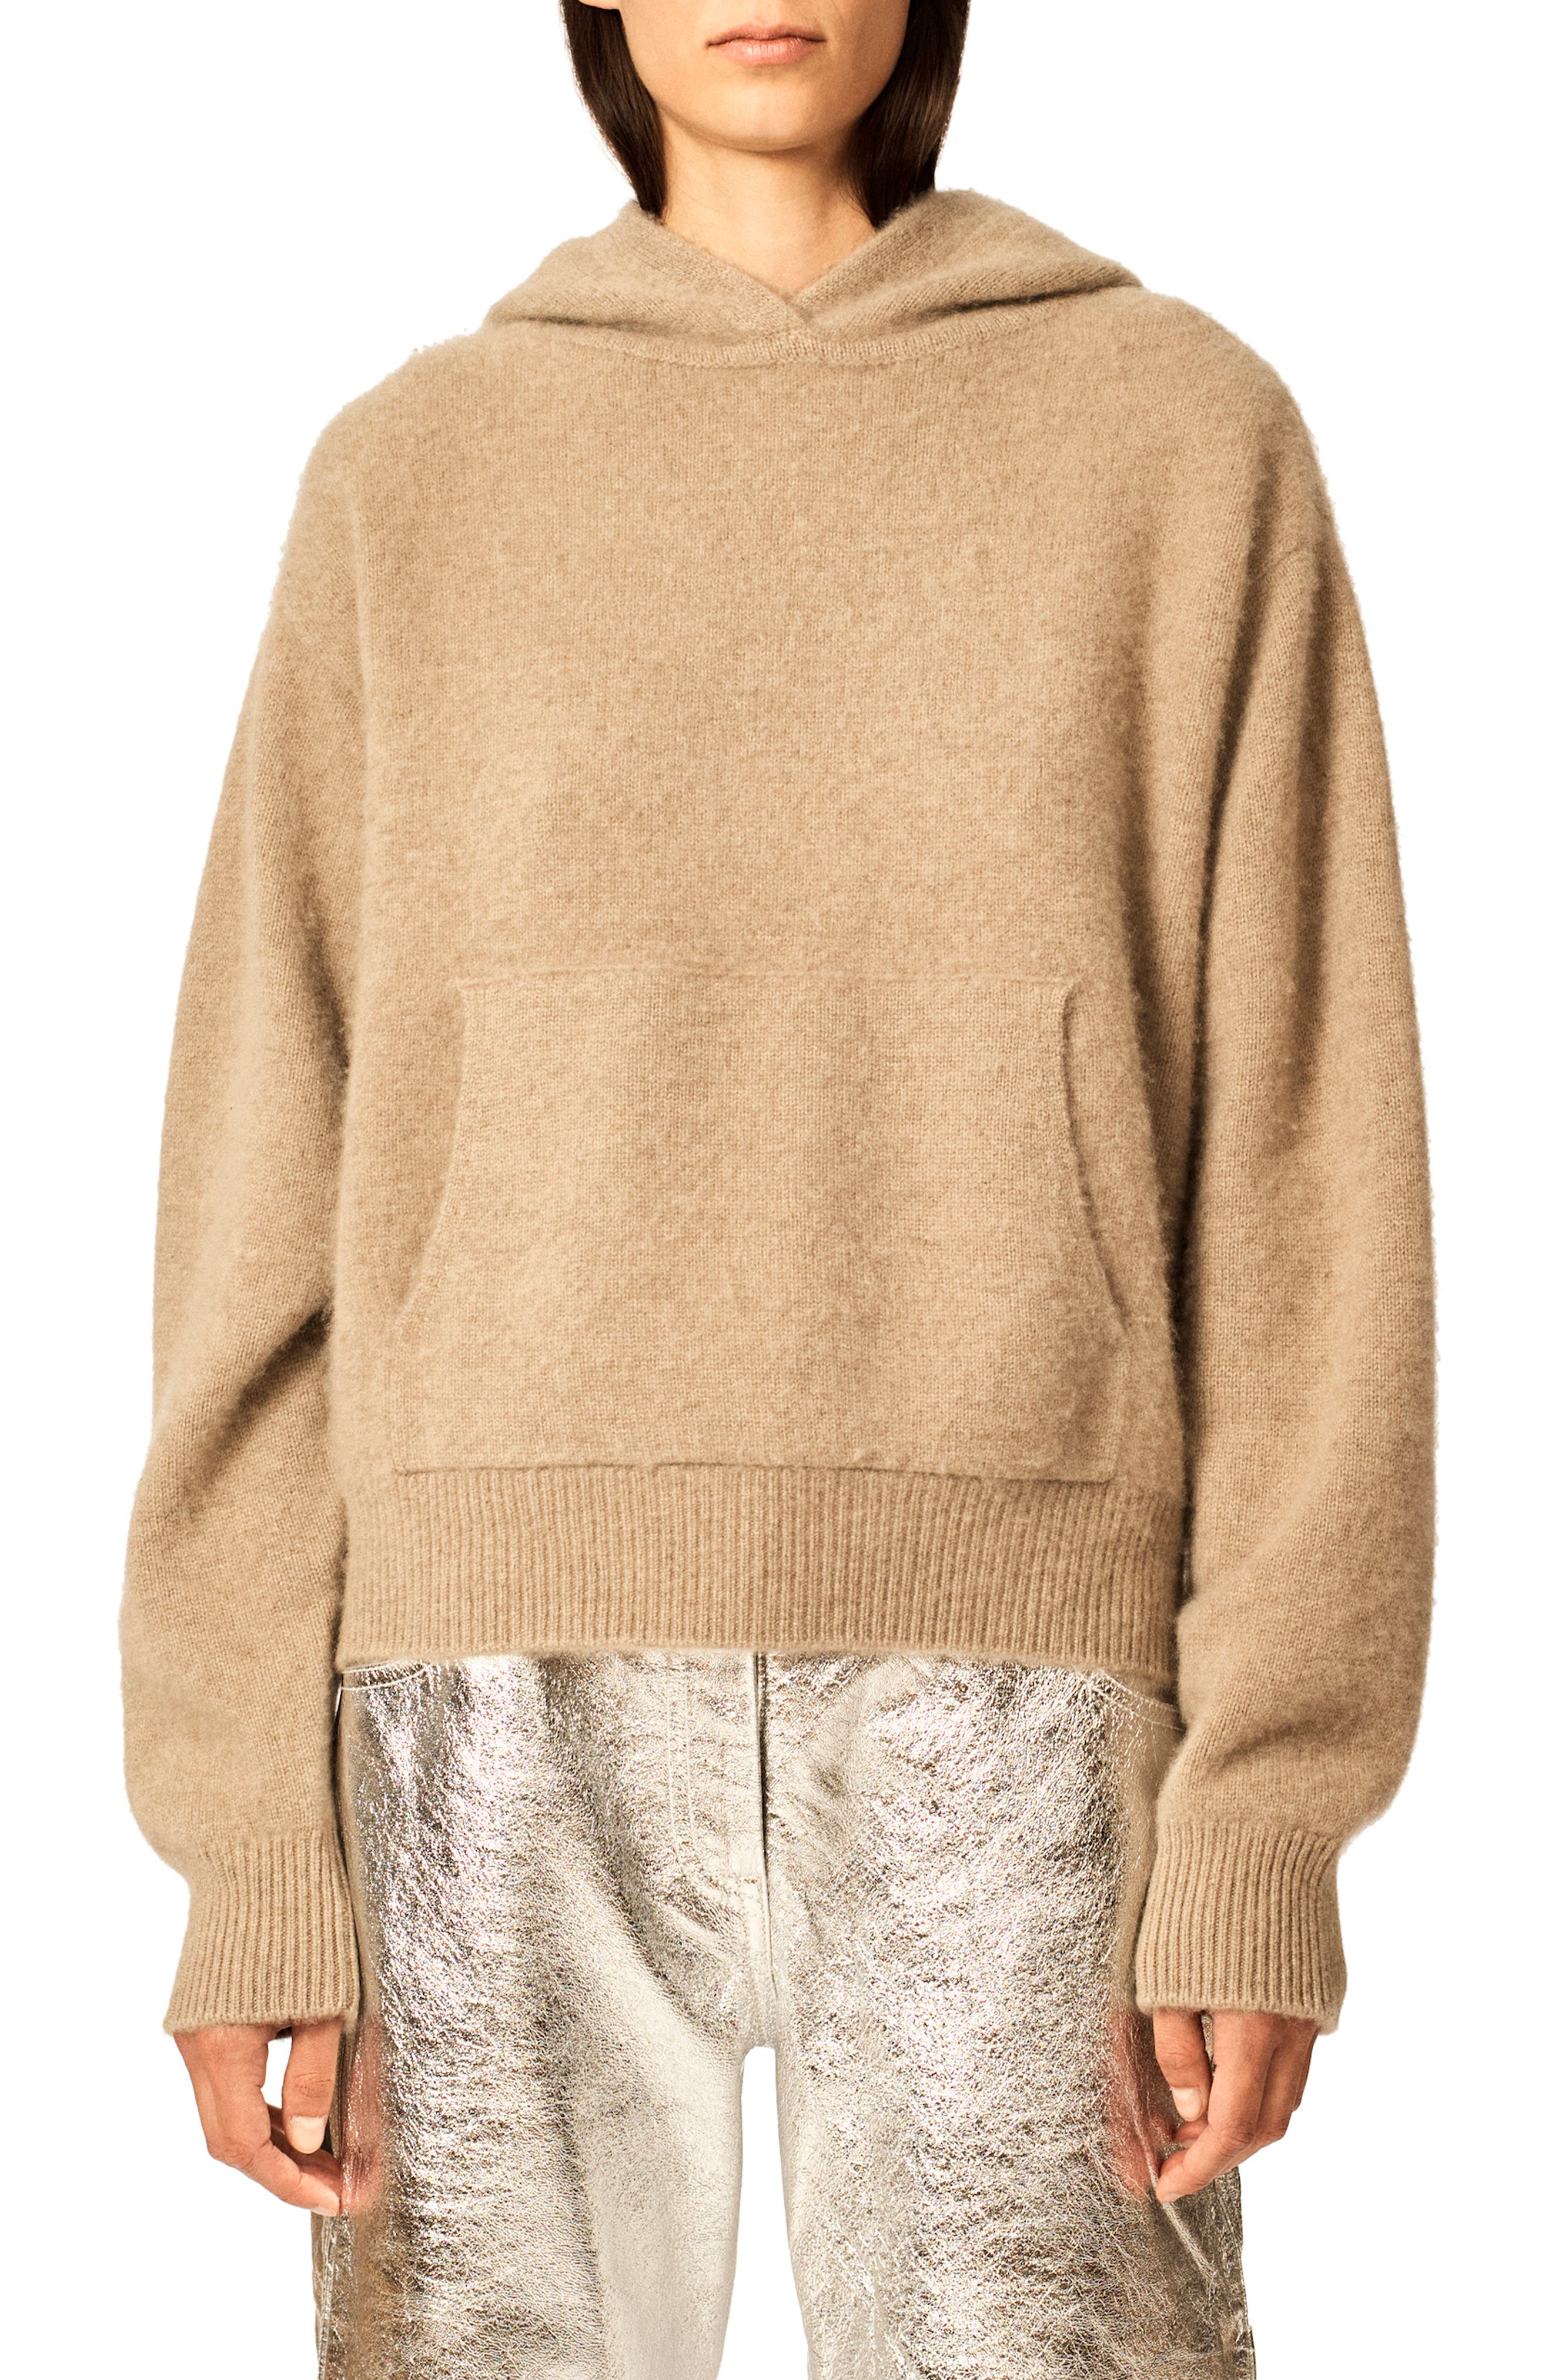 The Lindsey Hoodie Cashmere Sweater